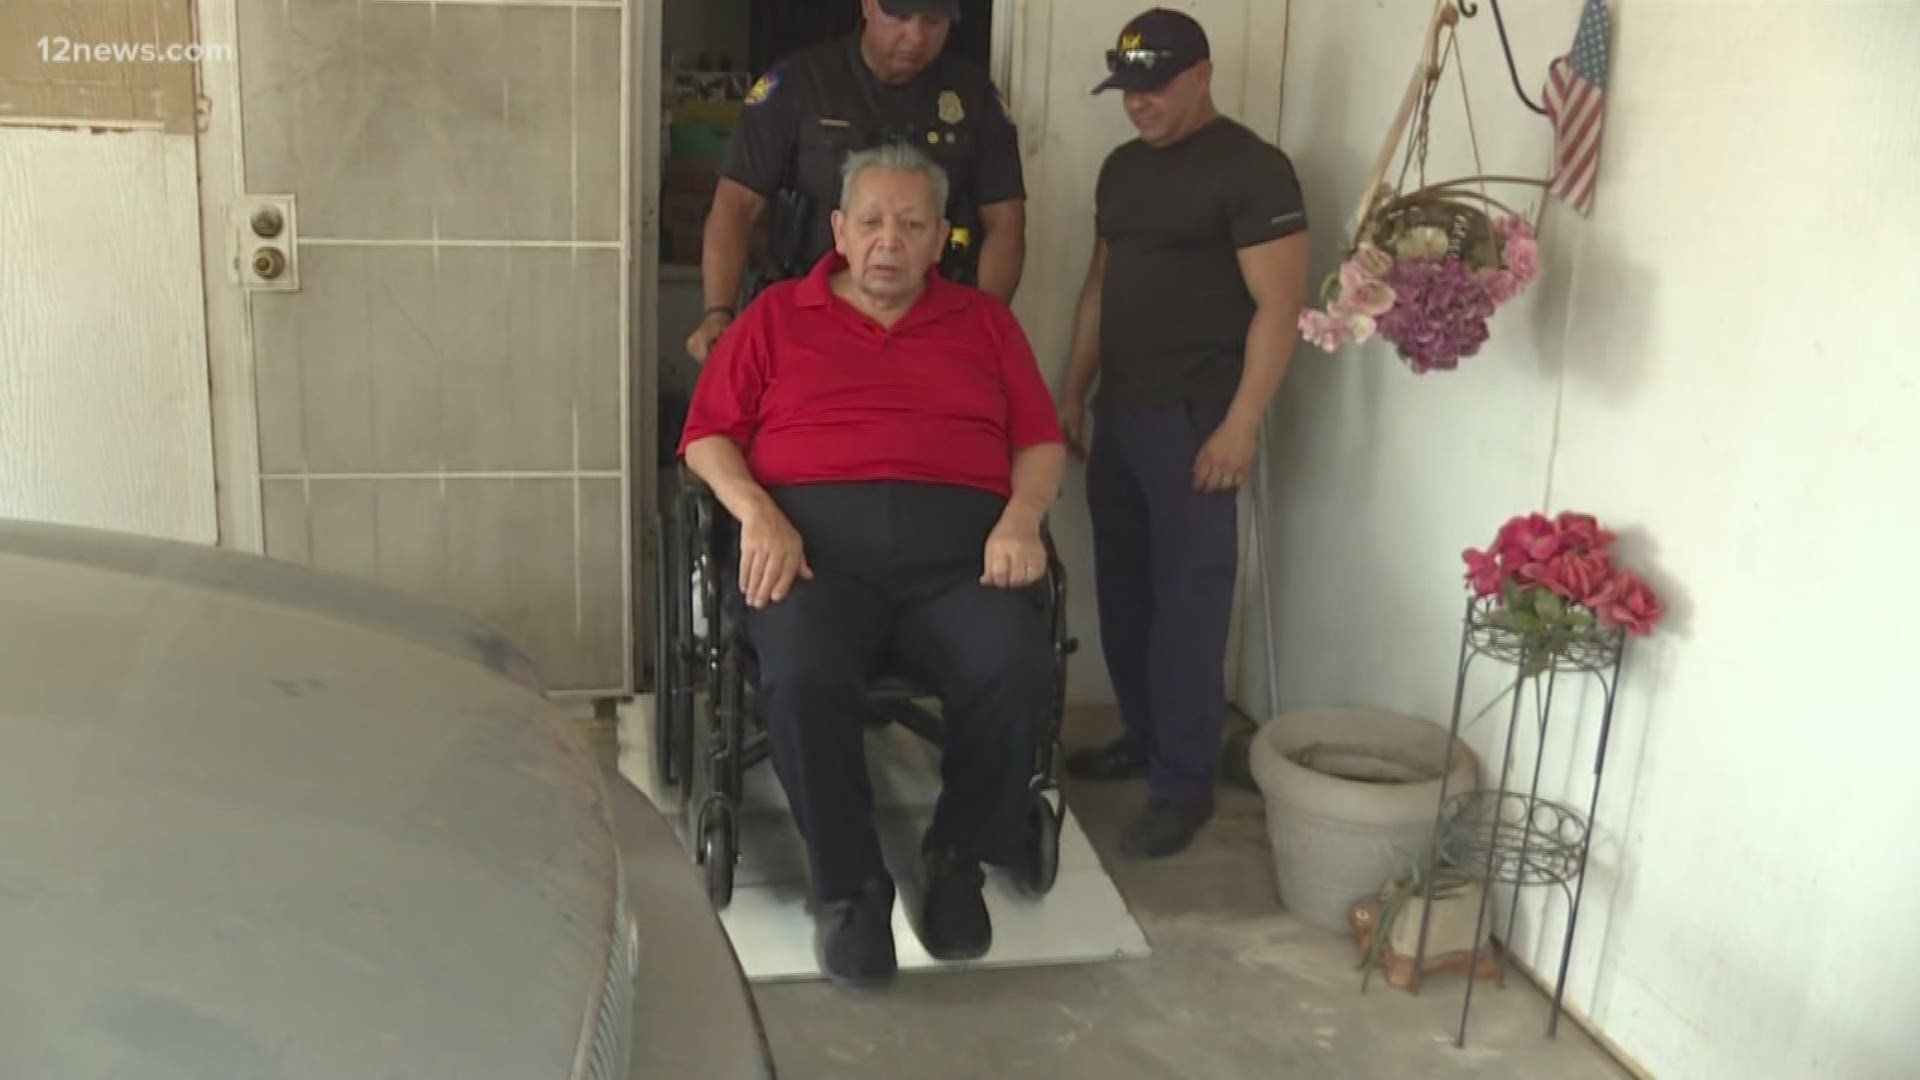 84-year-old Eli Flores received a ramp for his home from Phoenix PD, Thursday. The officers say they saw the Korean War vet in need and worked with Operation Enduring Gratitude to rebuild the ramp for Eli.